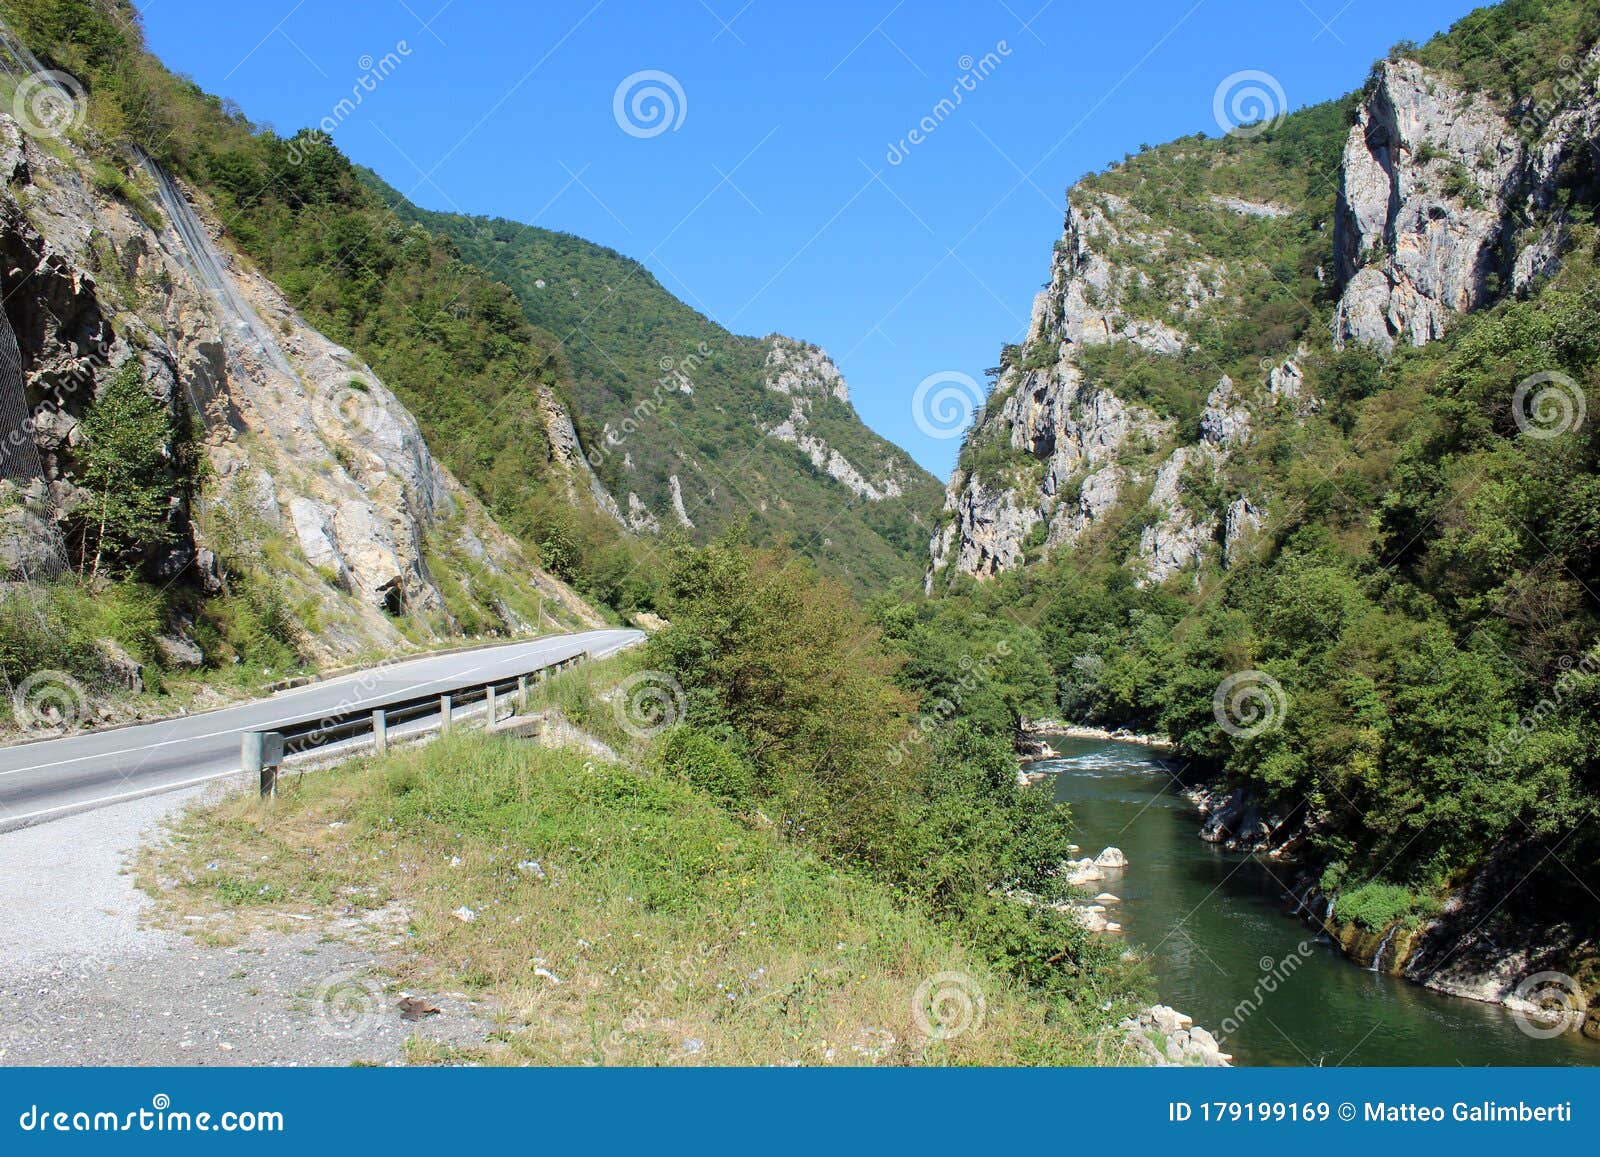 river lim gorge between serbia and montenegro